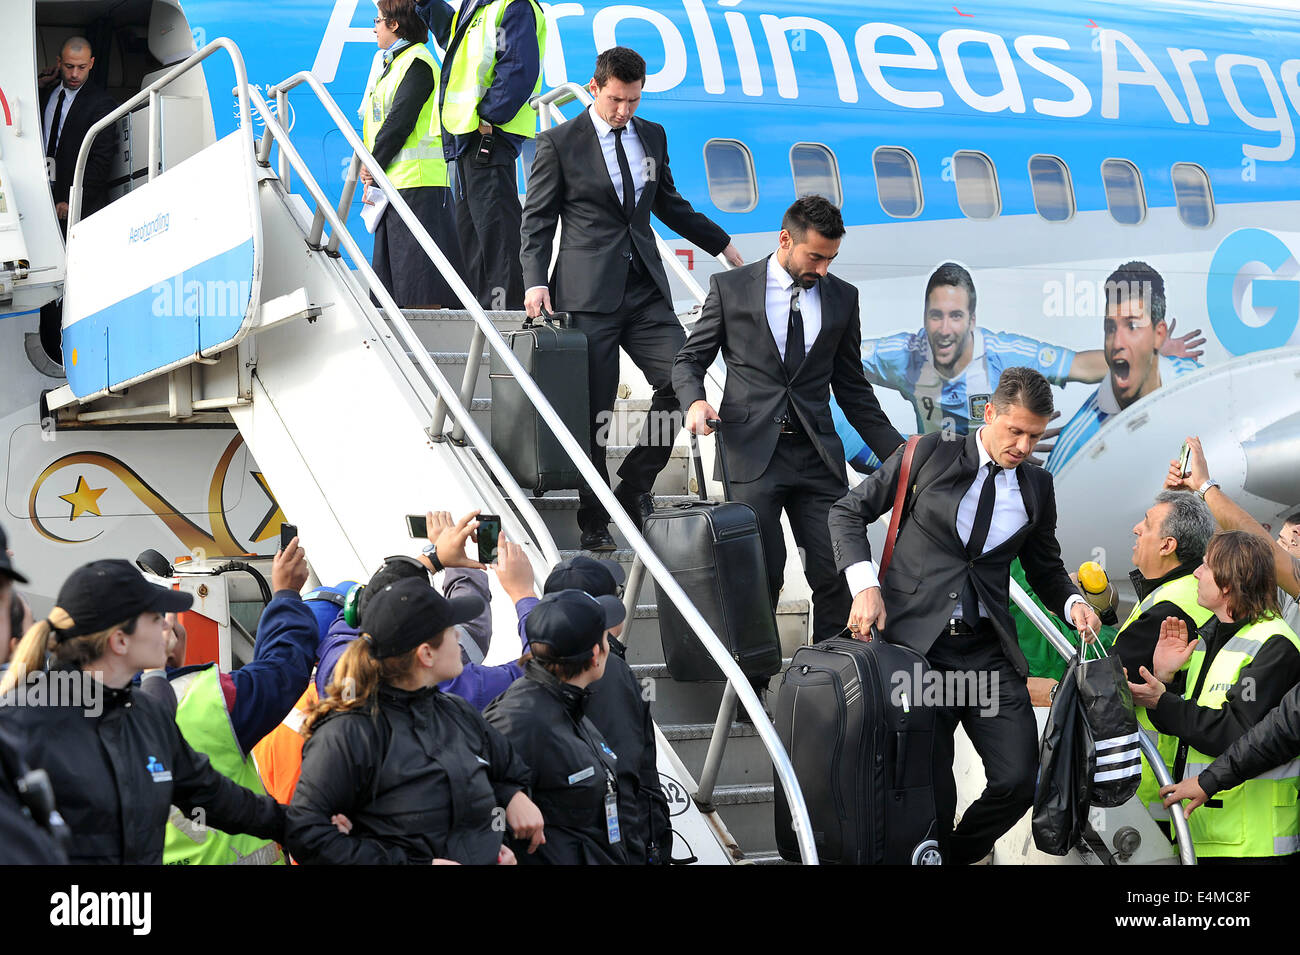 Ezeiza, Argentina. 14th July, 2014. Lionel Messi (Top), Ezequiel Lavezzi (C) and Martin Demichelis (Bottom) of Argentina National Team descend of the plane in the Minister Pistarini International Airport, in the city of Ezeiza, Argentina, on July 14, 2014. Argentina National Team returned after won the silver in the 2014 FIFA World Cup Brazil. Credit:  Leonardo Zavattaro/TELAM/Xinhua/Alamy Live News Stock Photo